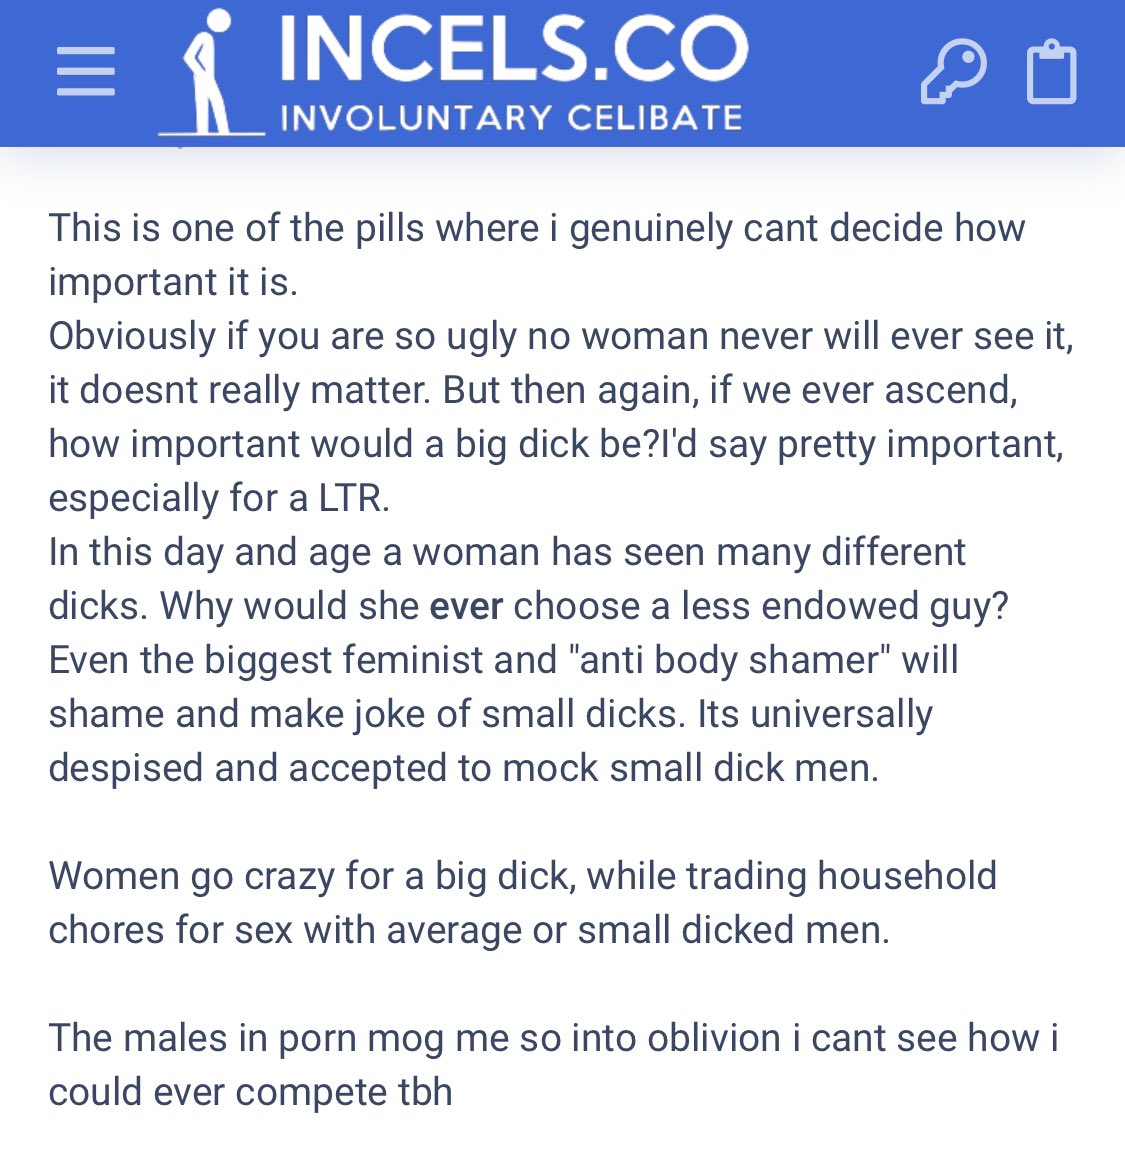 Another question about penis size. Honestly this would be an excellent question for someone trying to explore sexuality. It would definitely be better to ask actual women. And then every assertion this incel makes is dead wrong. But let’s look at the replies (thread incoming)